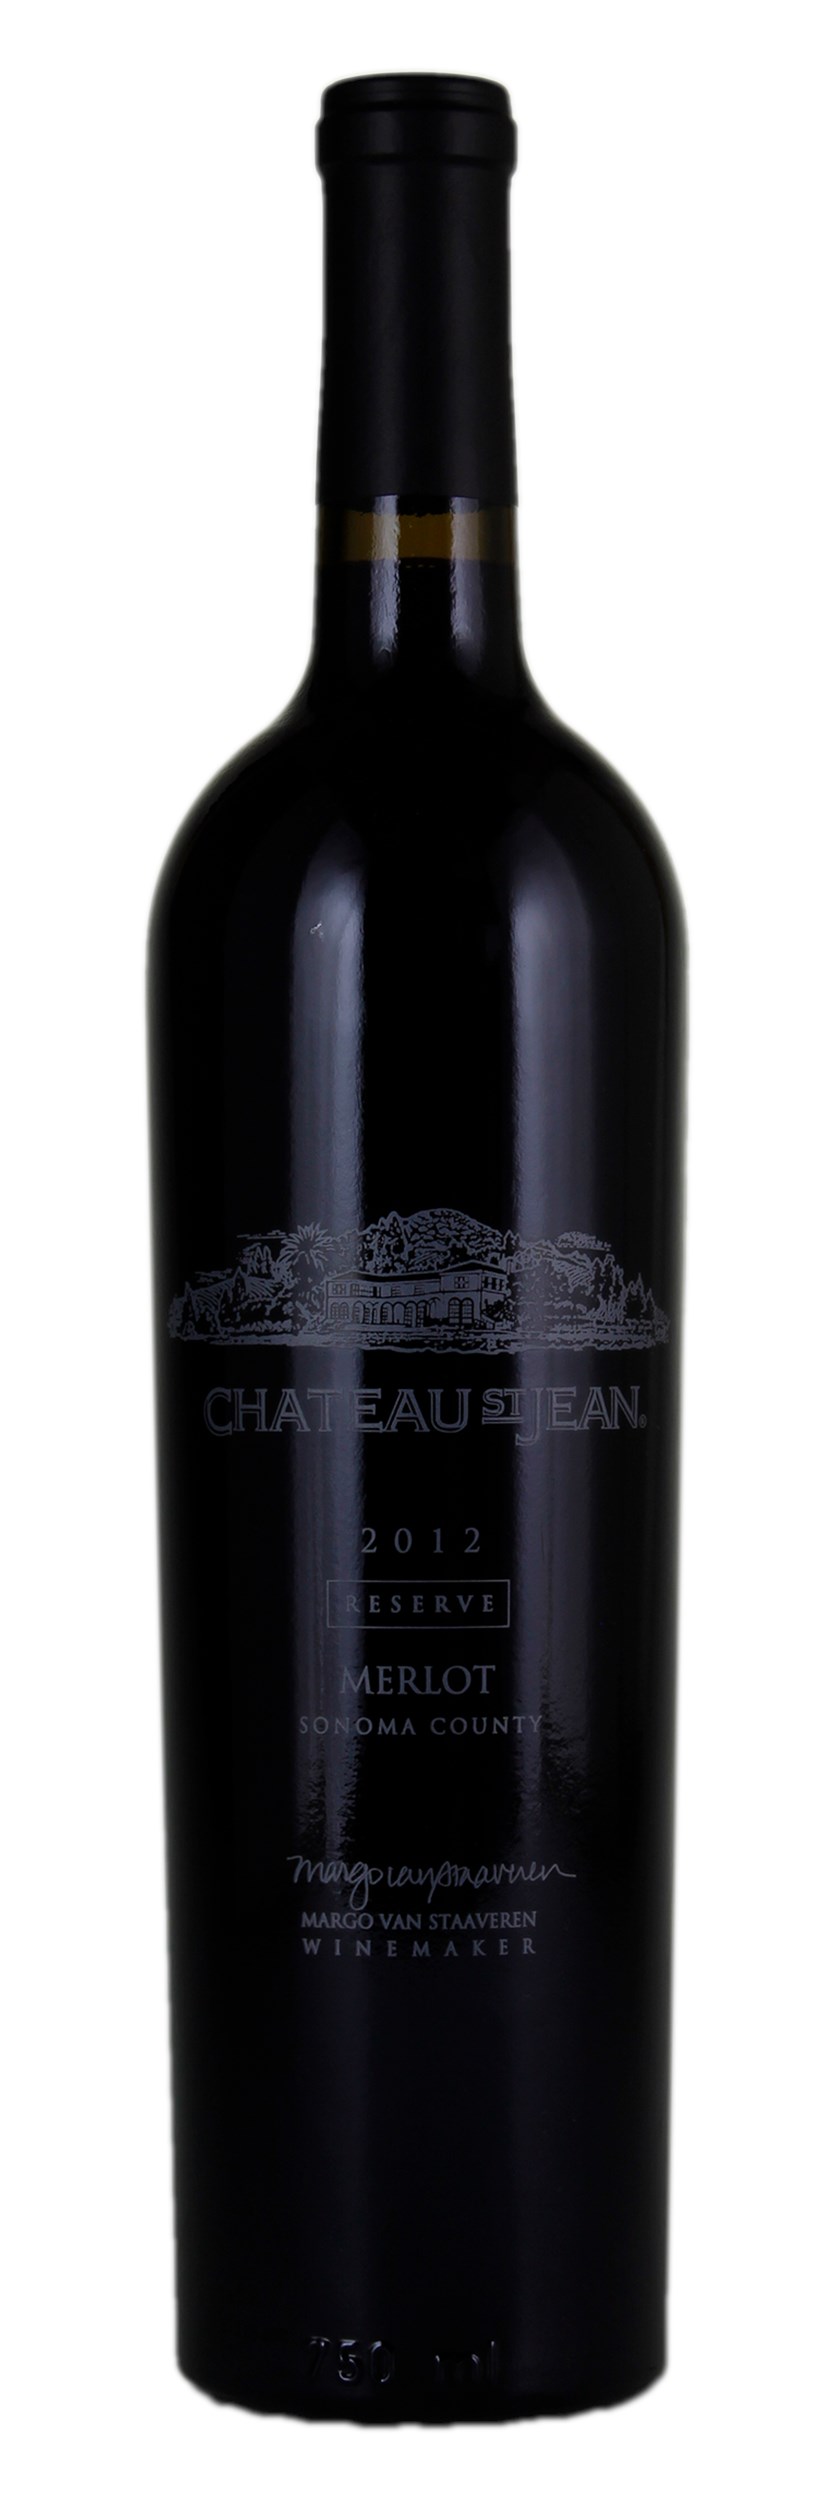 Chateau St Jean Reserve Merlot 2012 Red Wine From United States